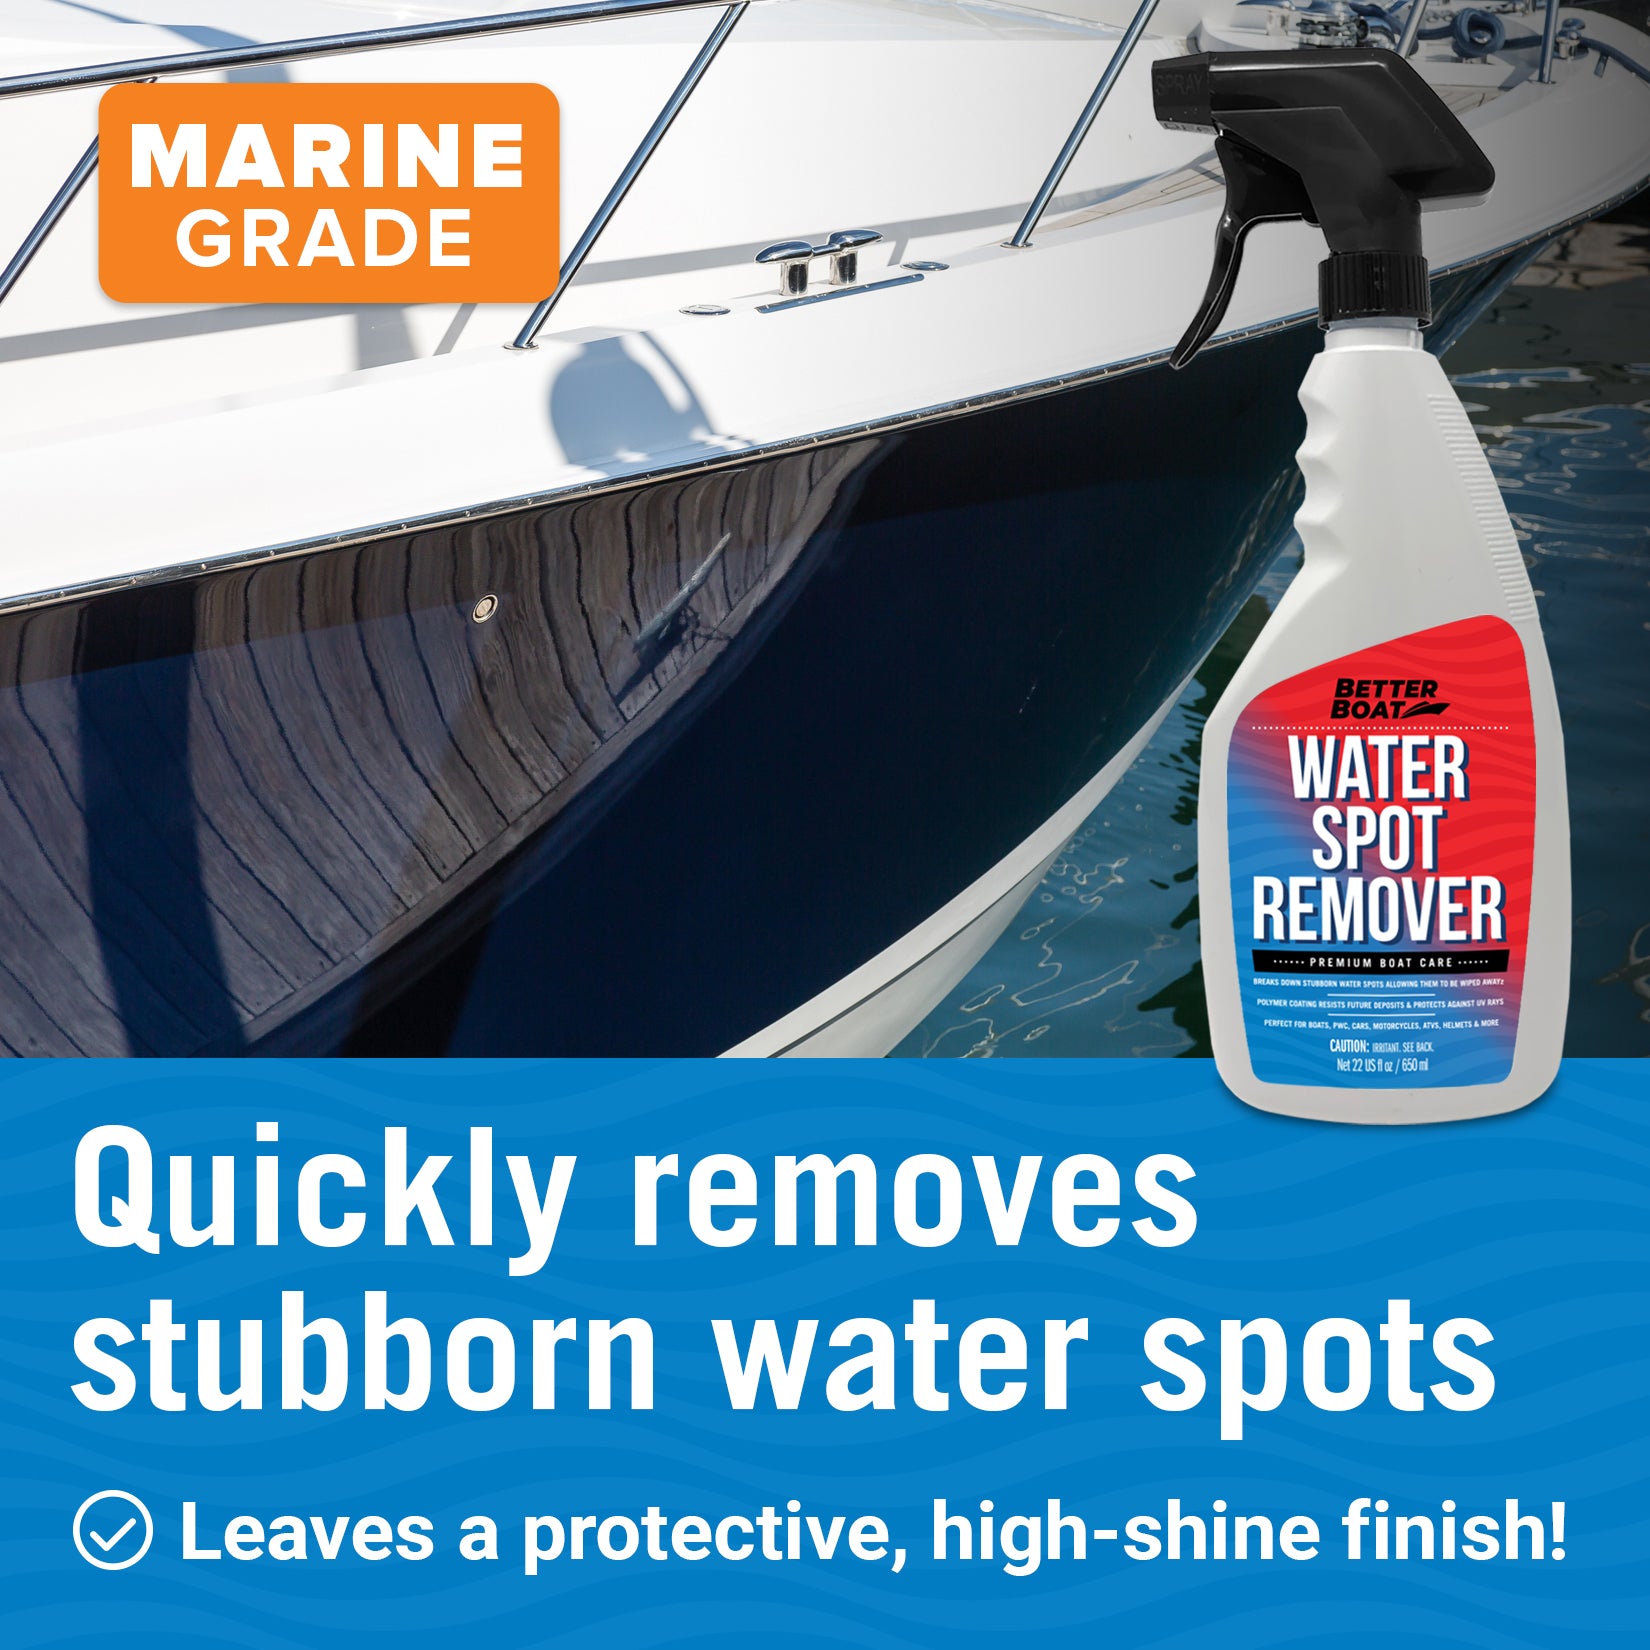 Hard Water Spot Remover for Boats & Cars | Better Boat